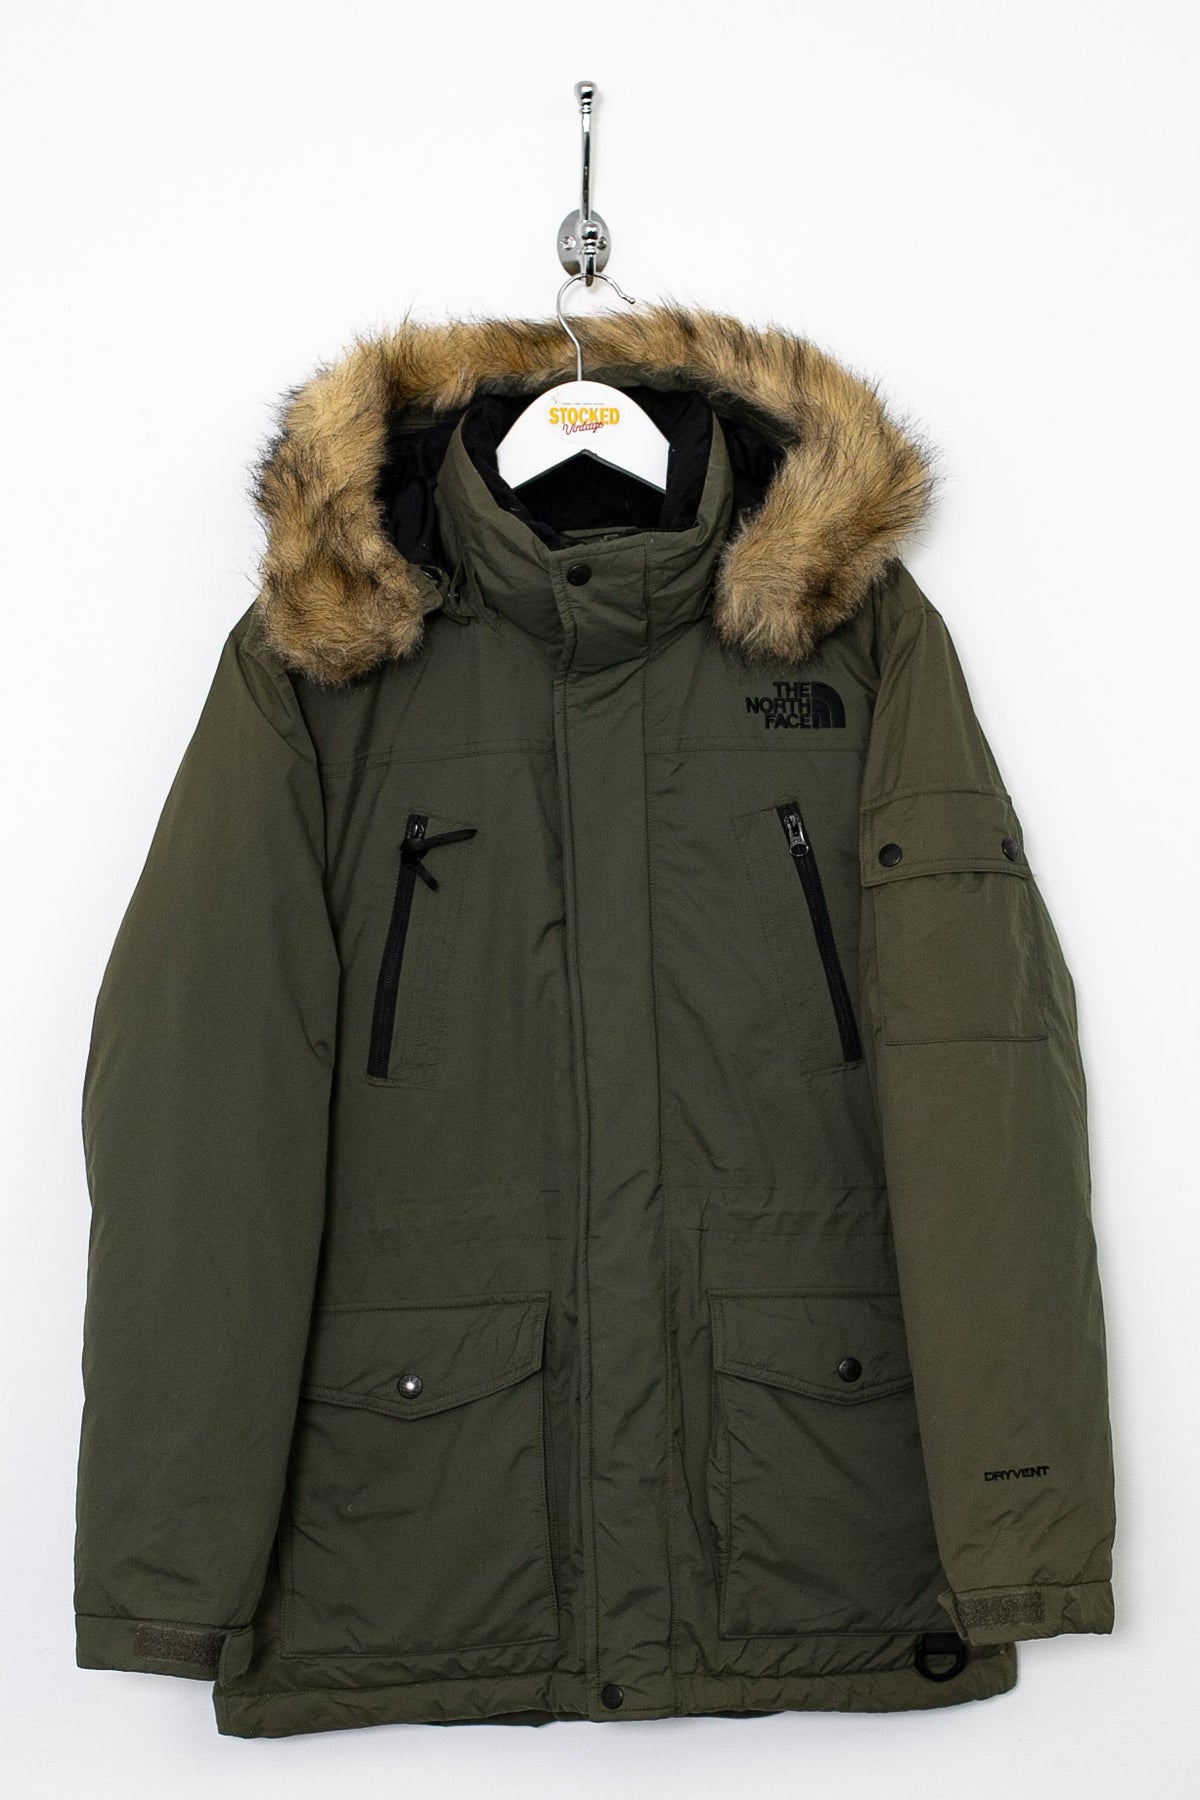 90s The North Face Dryvent Parka Jacket (S)